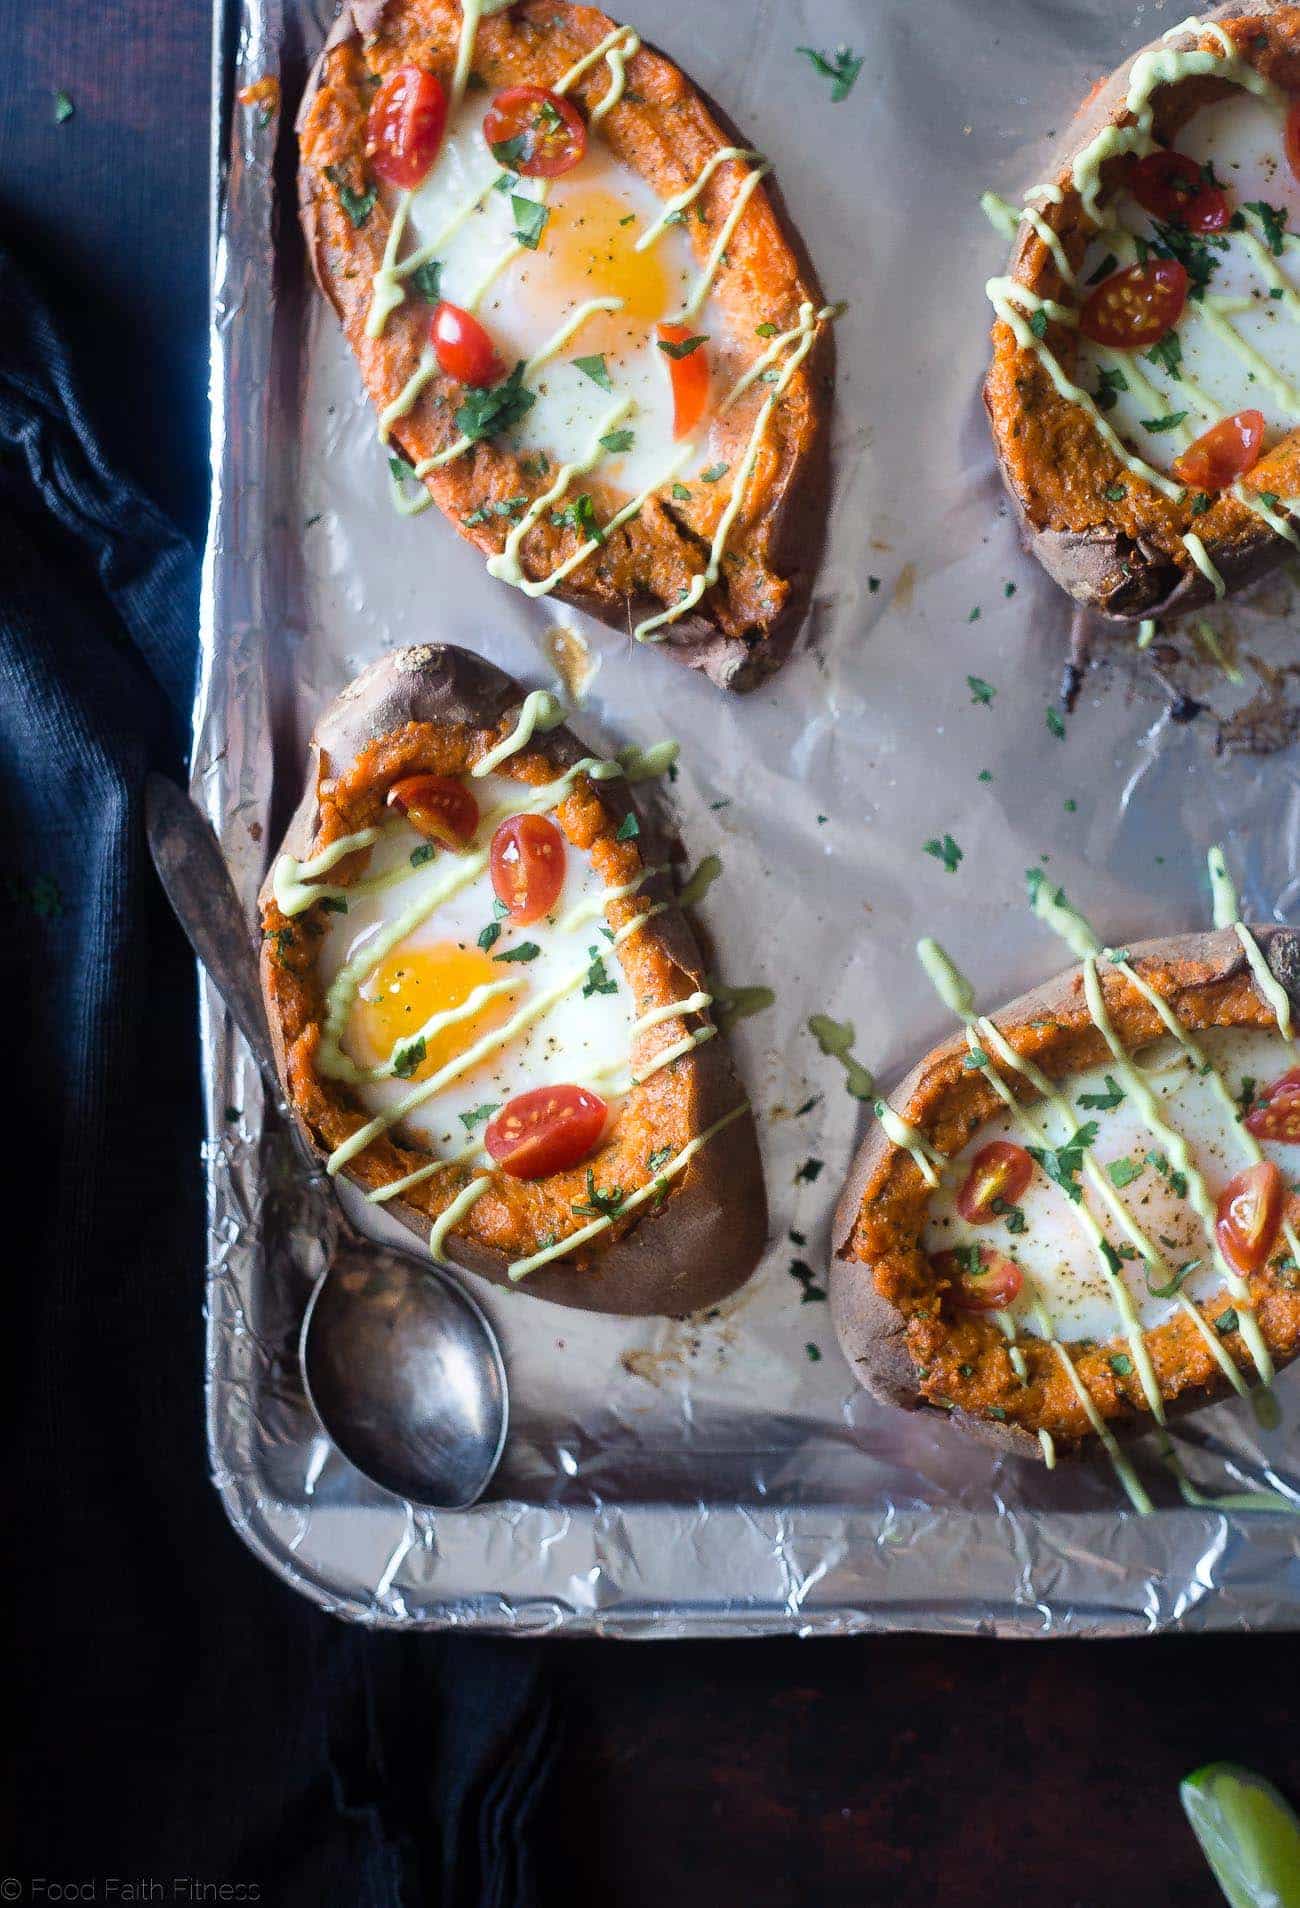 20 of the Best Vegetarian and Gluten-Free Recipes to Make For Dinner